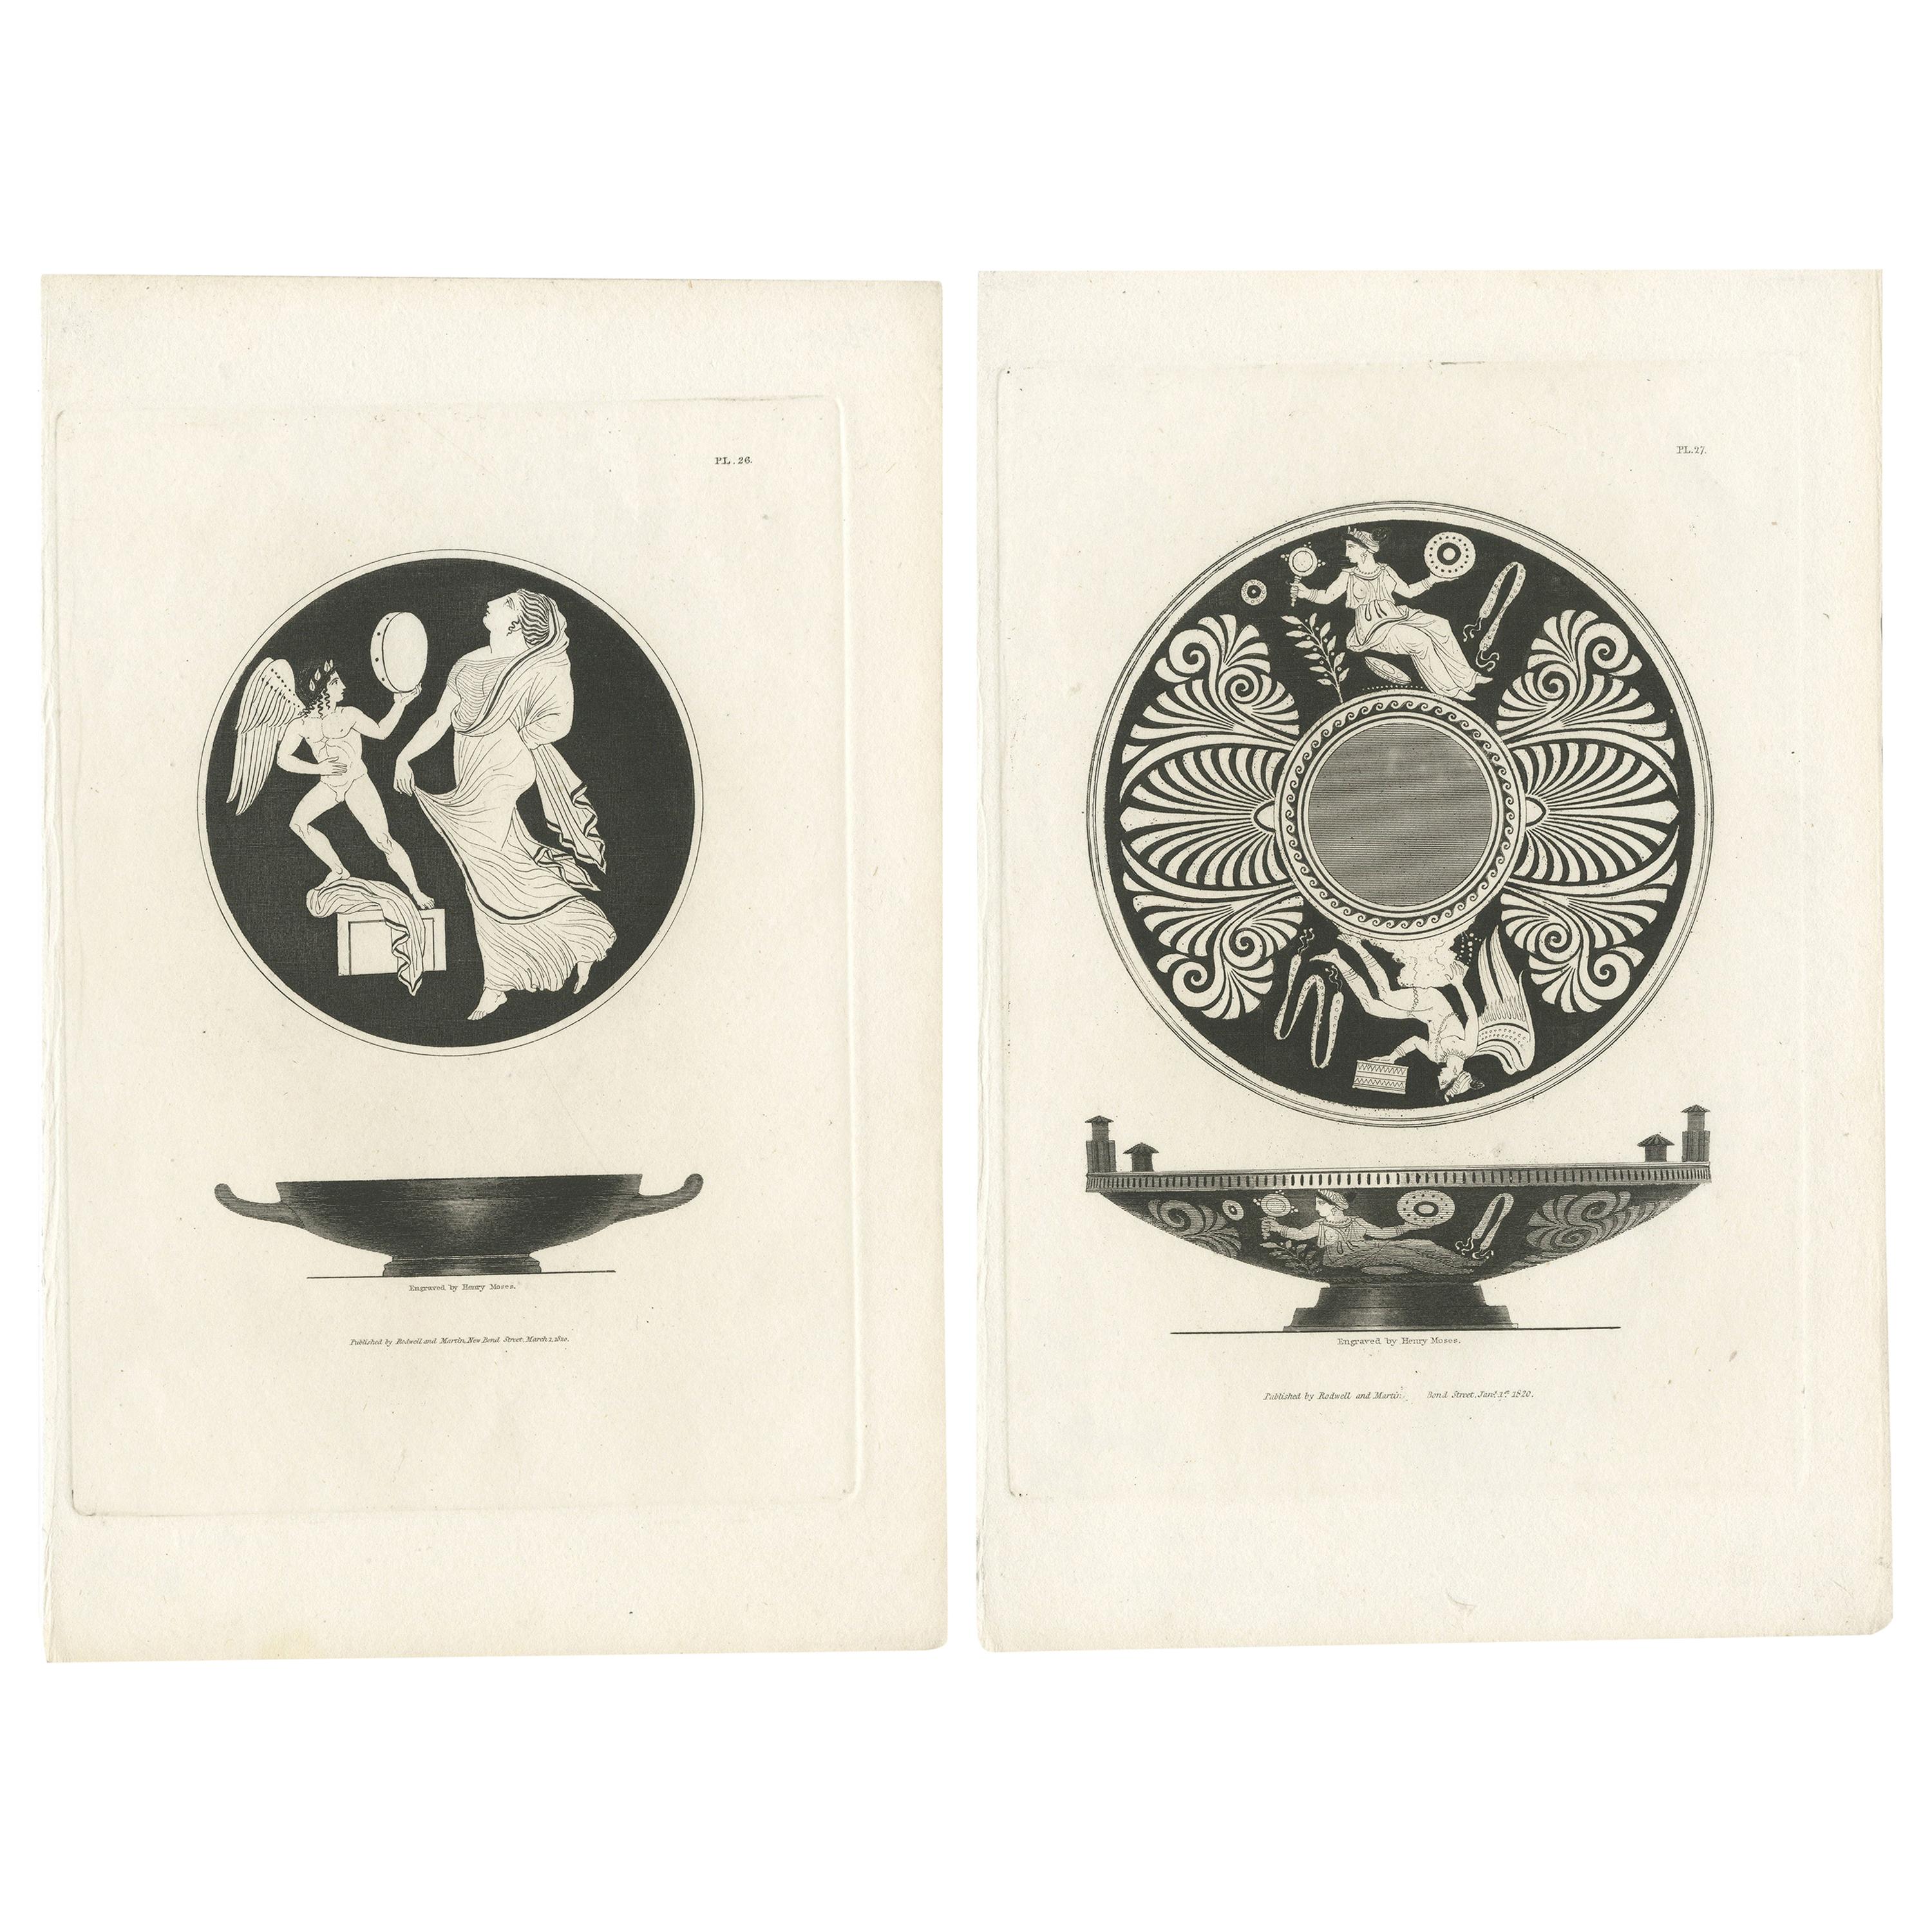 Set of 2 Antique Prints Depicting the Design of Vases/Plates by Moses, 1820 For Sale